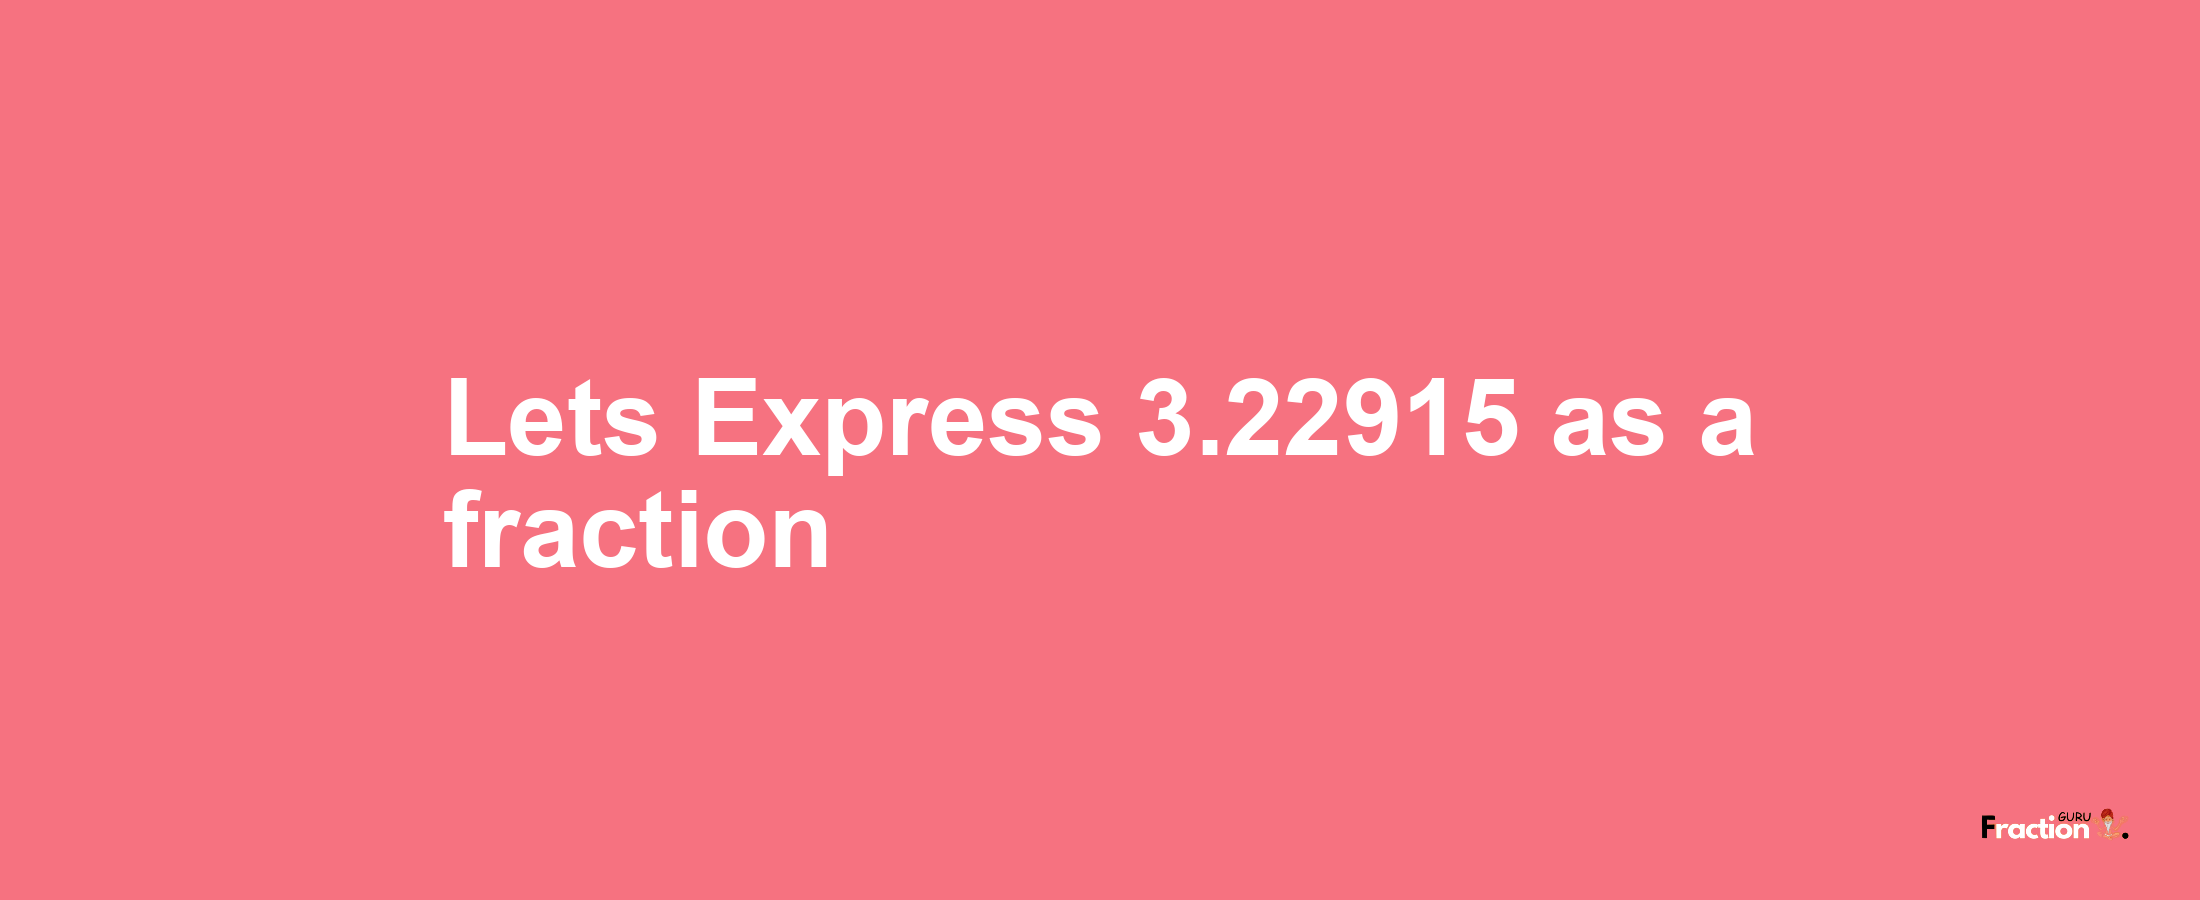 Lets Express 3.22915 as afraction